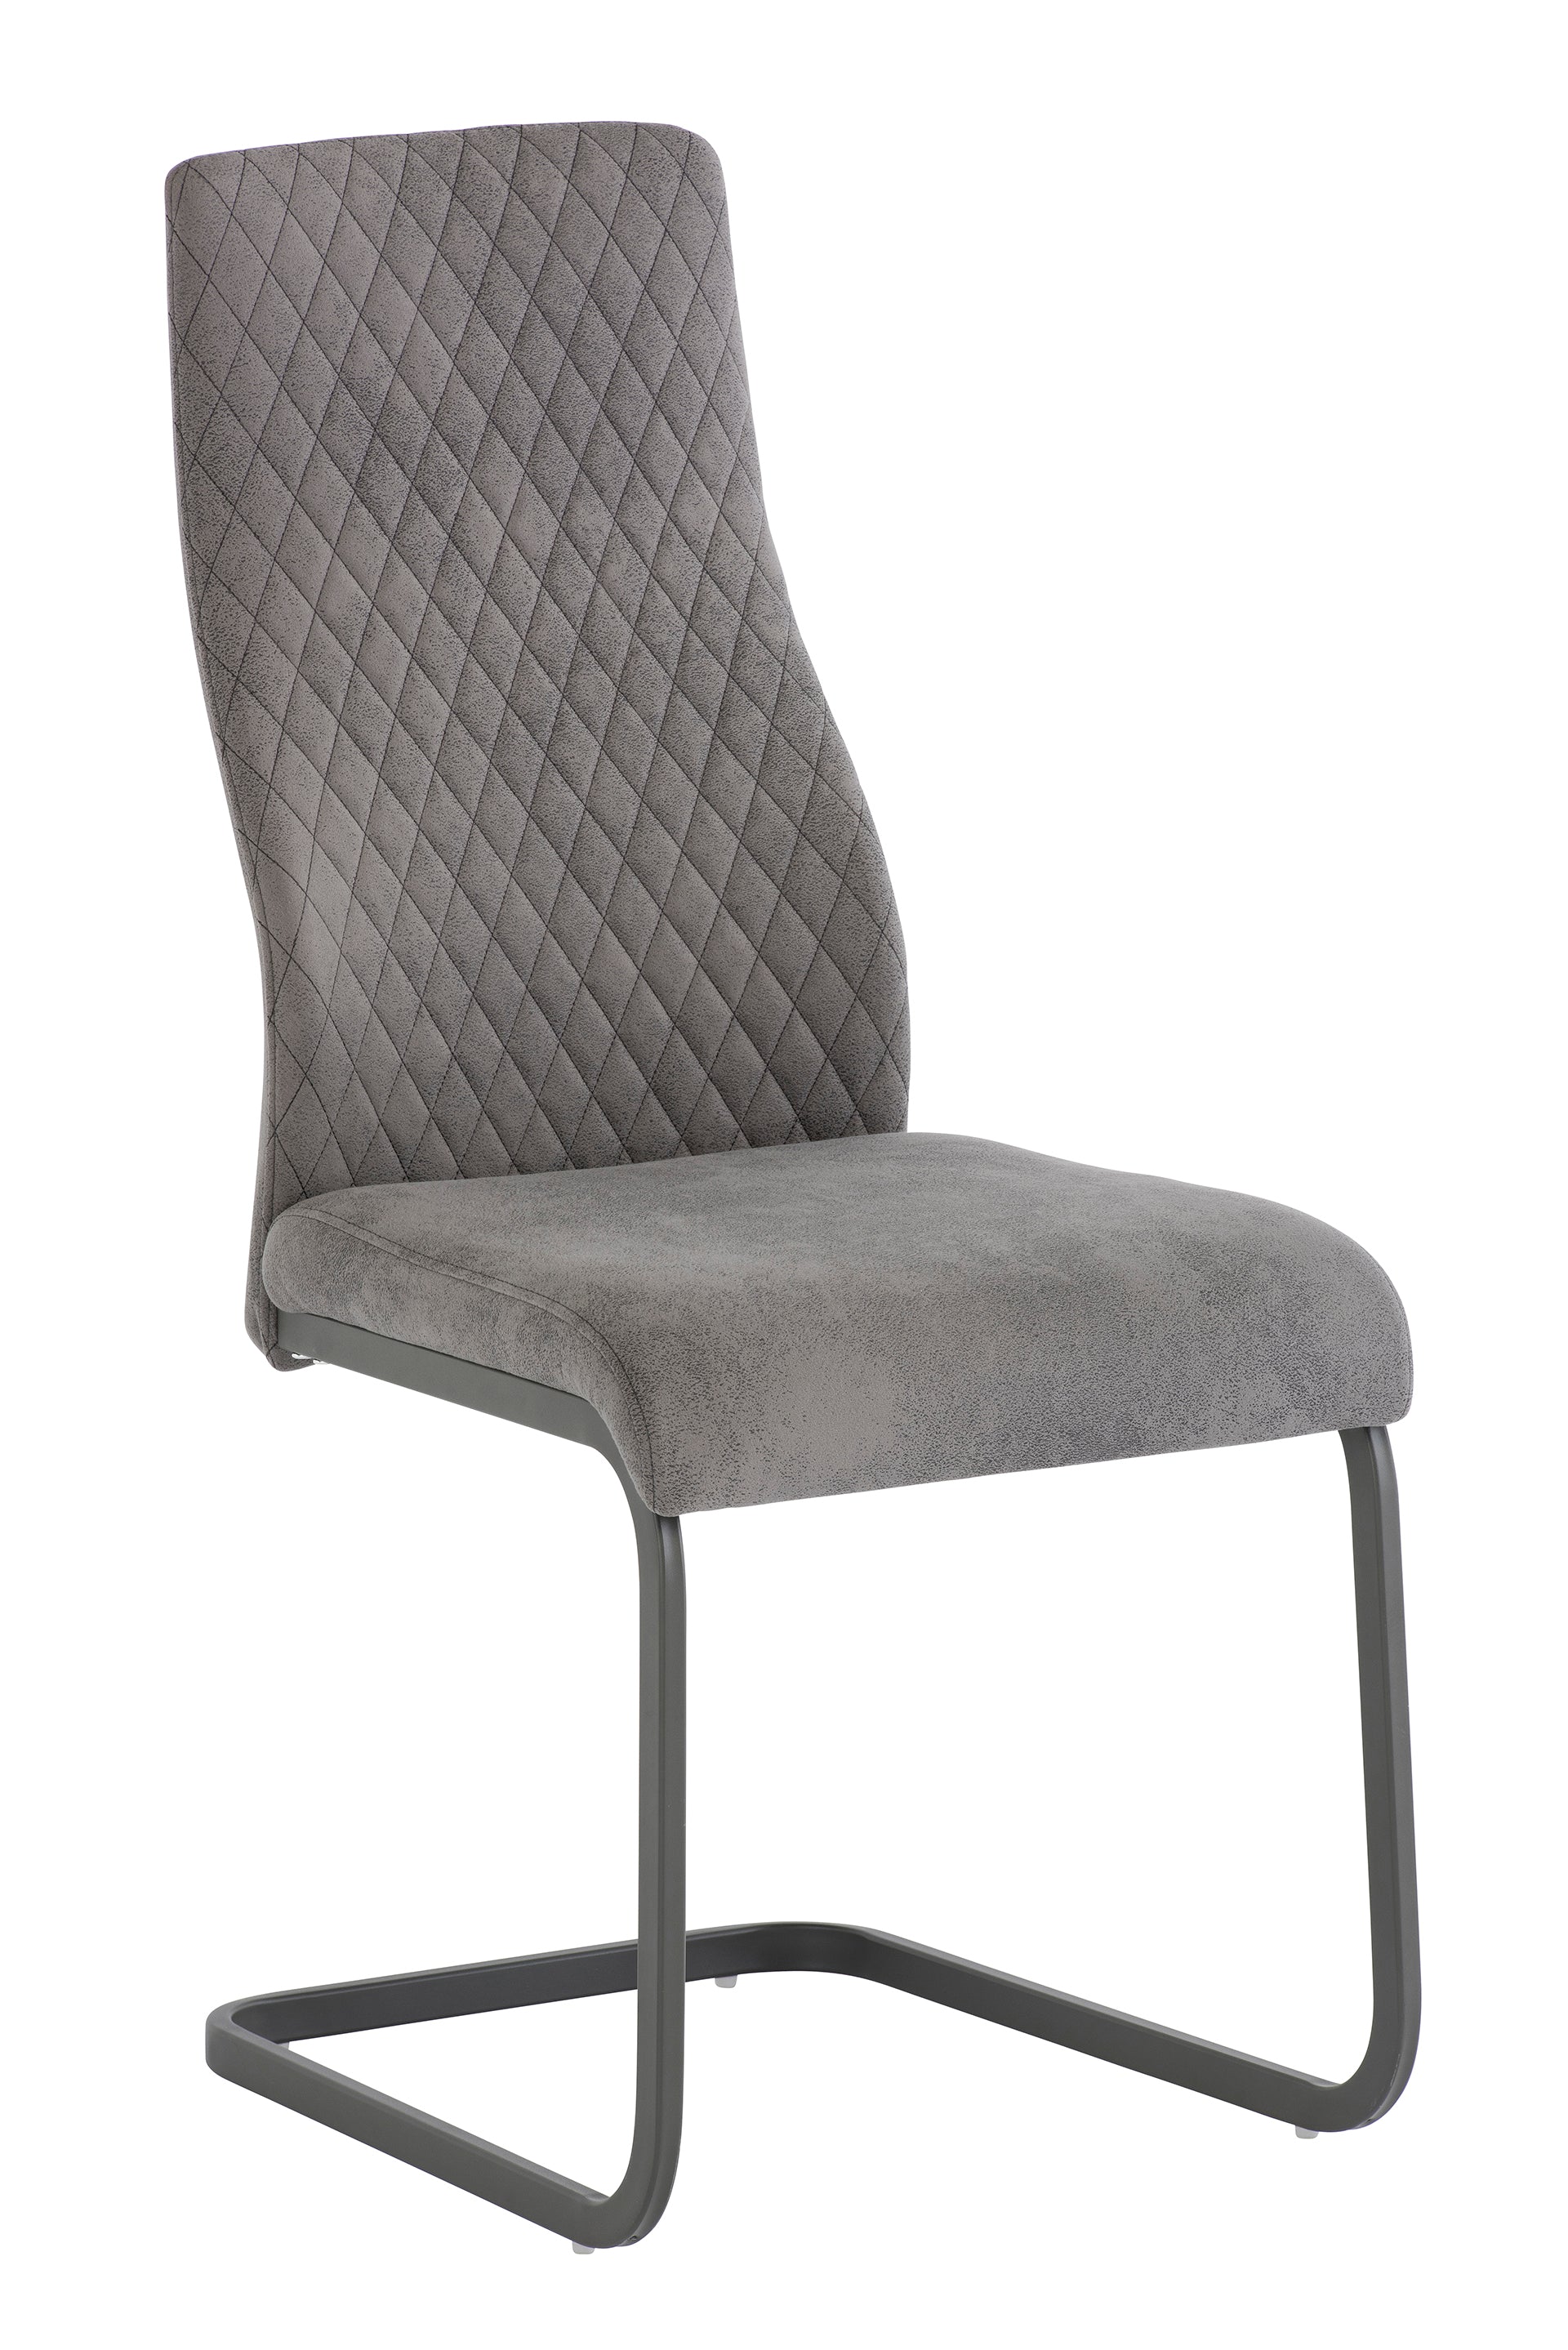 Palmer Fabric Dining Chair (Pairs)